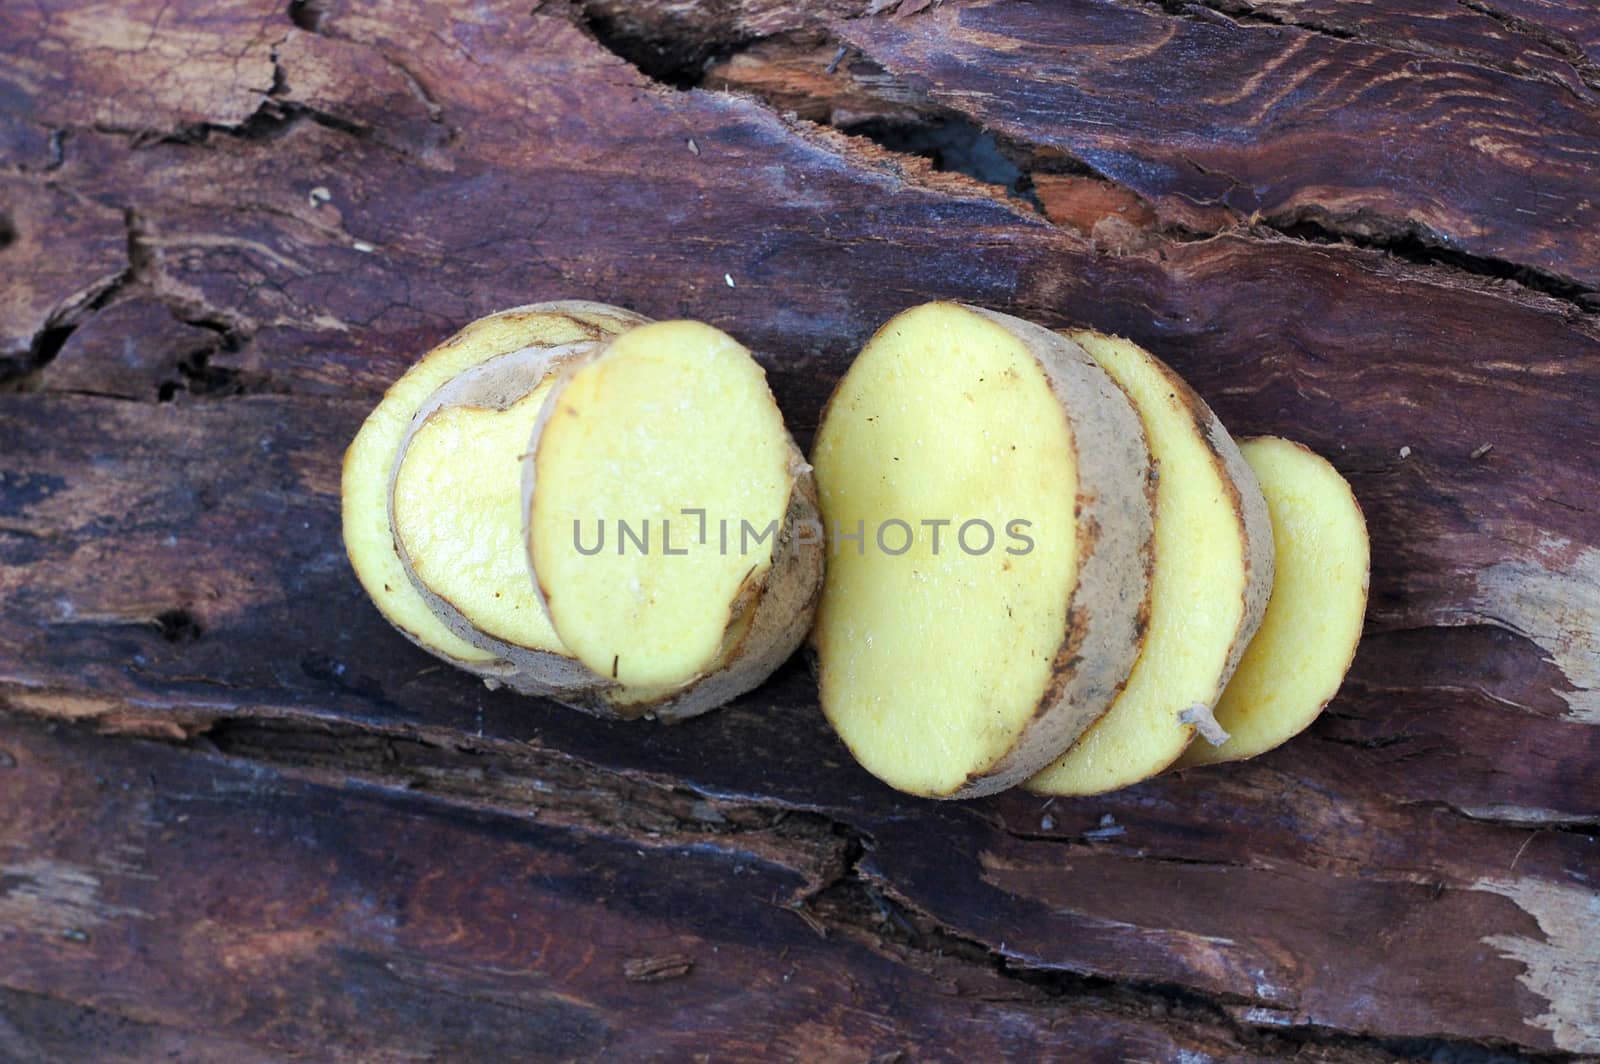 picture of a Sliced potatoes on dark wood background